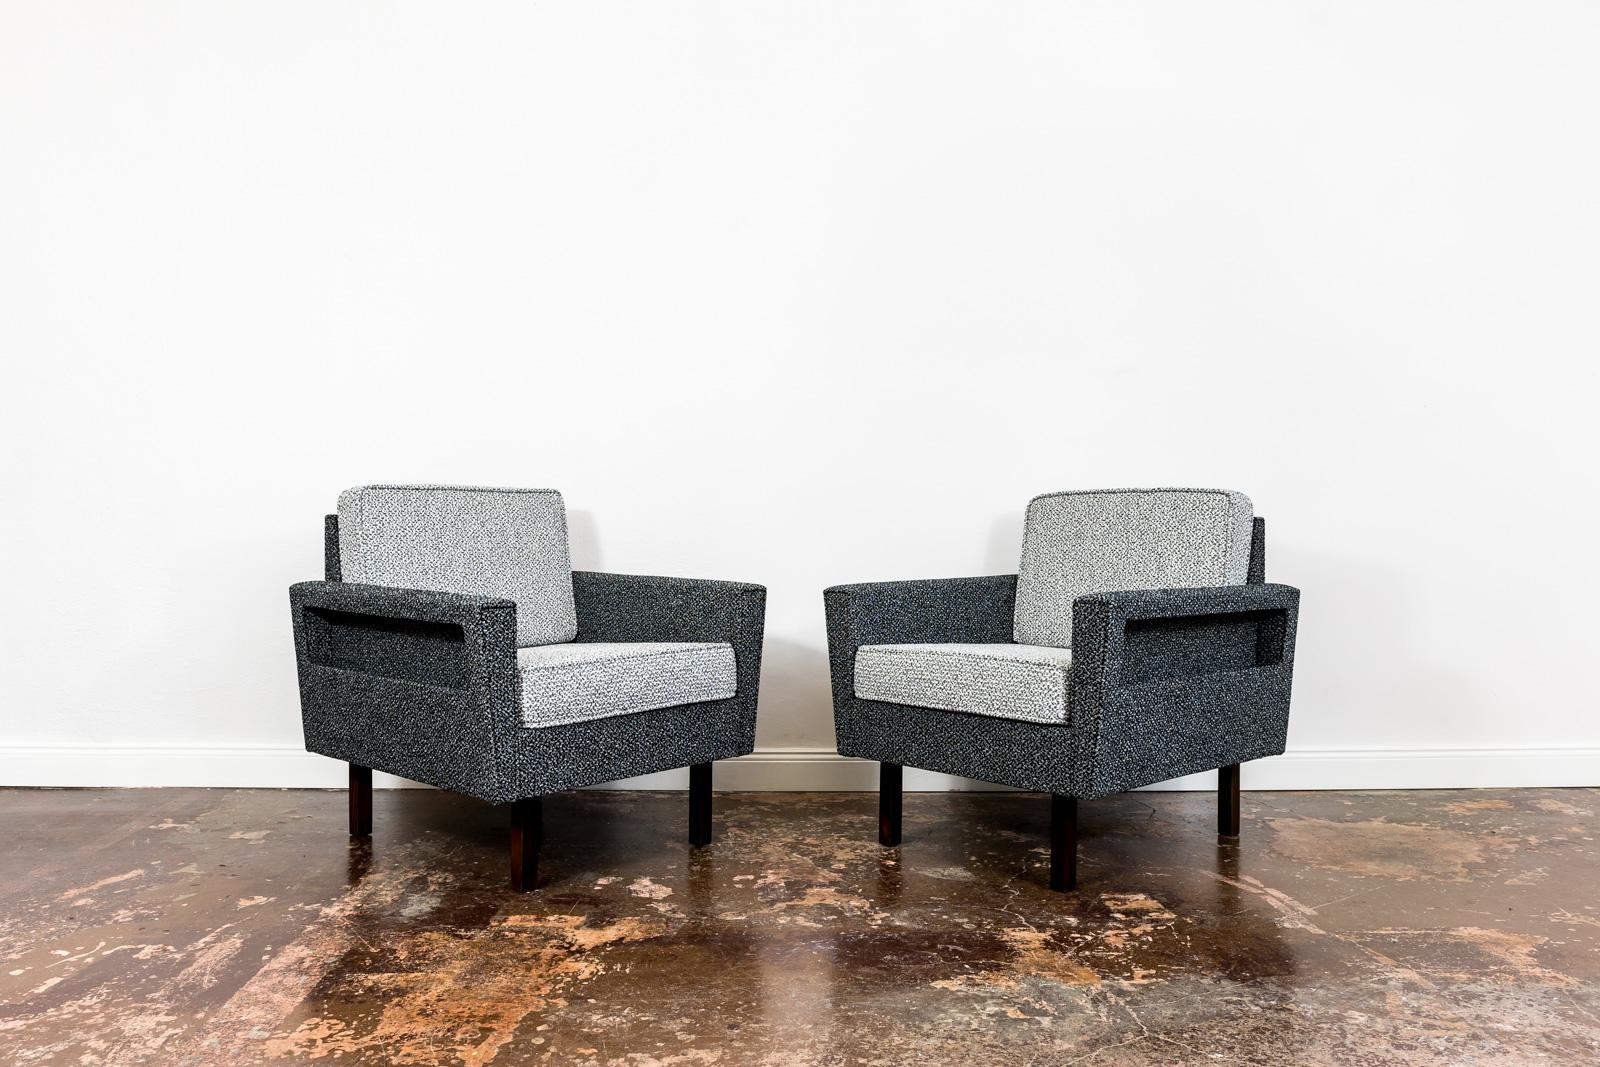 Pair of large club chairs, 1970s, Poland.
Reupholstered in gray-black and gray-white woven fabric.
Storage room under the armrests.